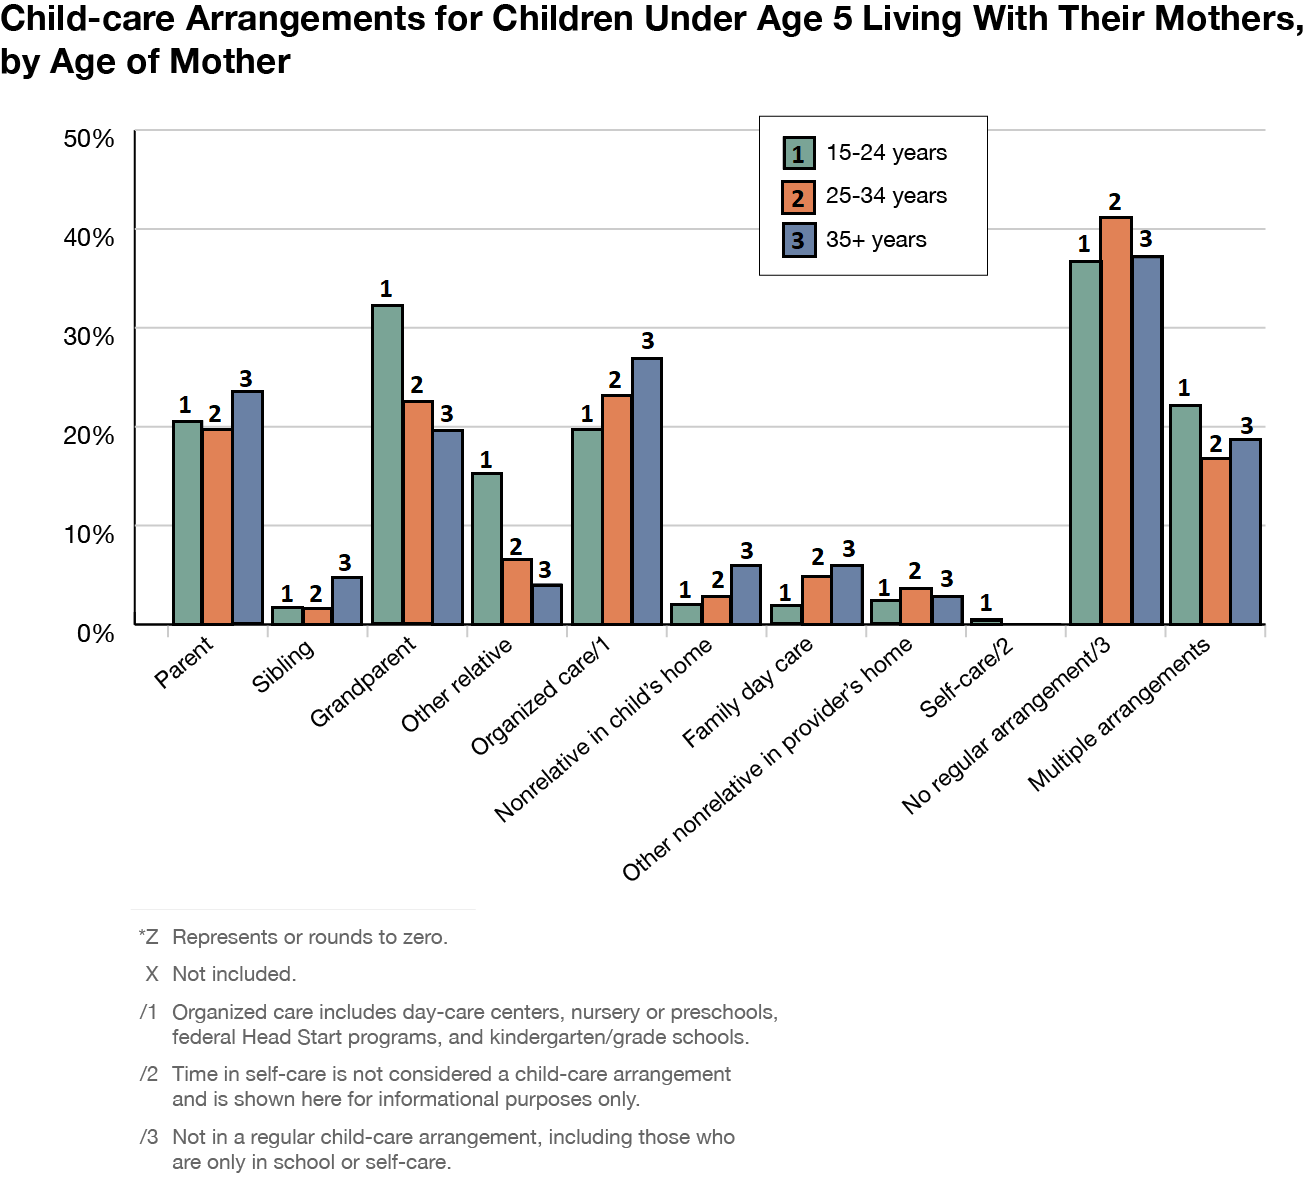 Child-care arrangements for children under age 5 living with their mothers, by age of mother. To find the details on the graph please press Image description link below it.